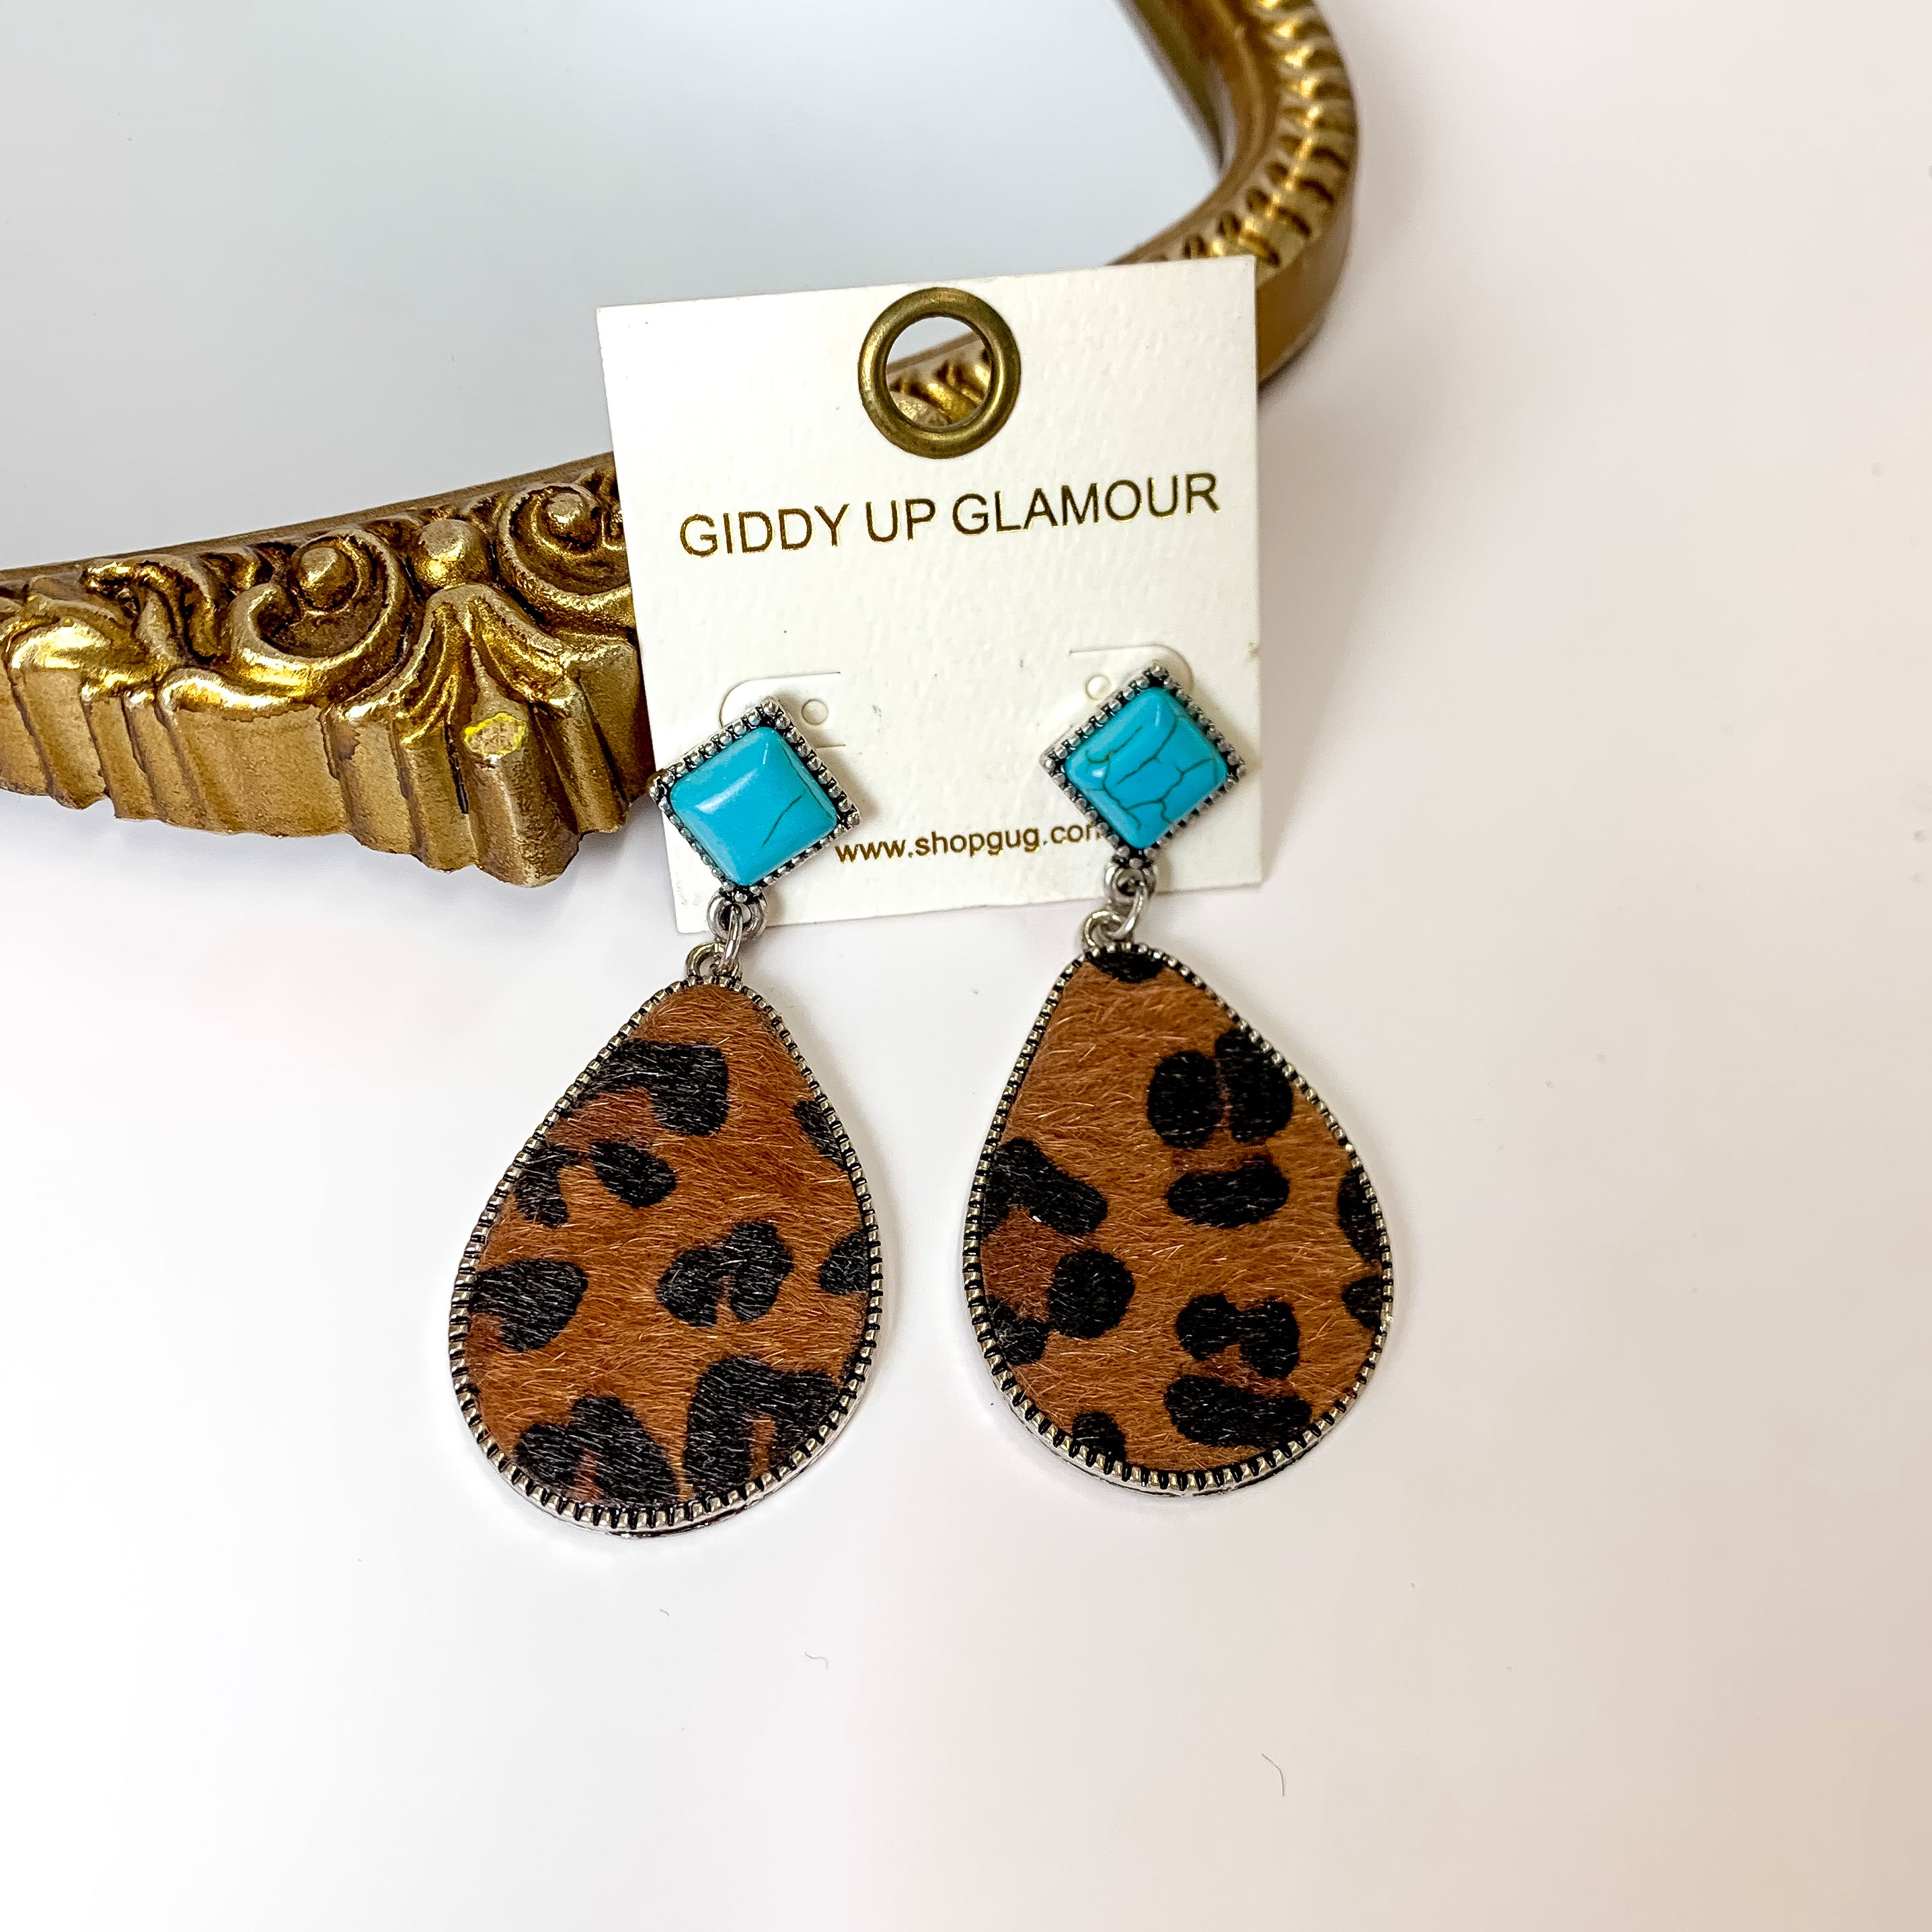 Silver Tone Faux Turquoise Post Teardrop Earrings in Brown Leopard Print - Giddy Up Glamour Boutique